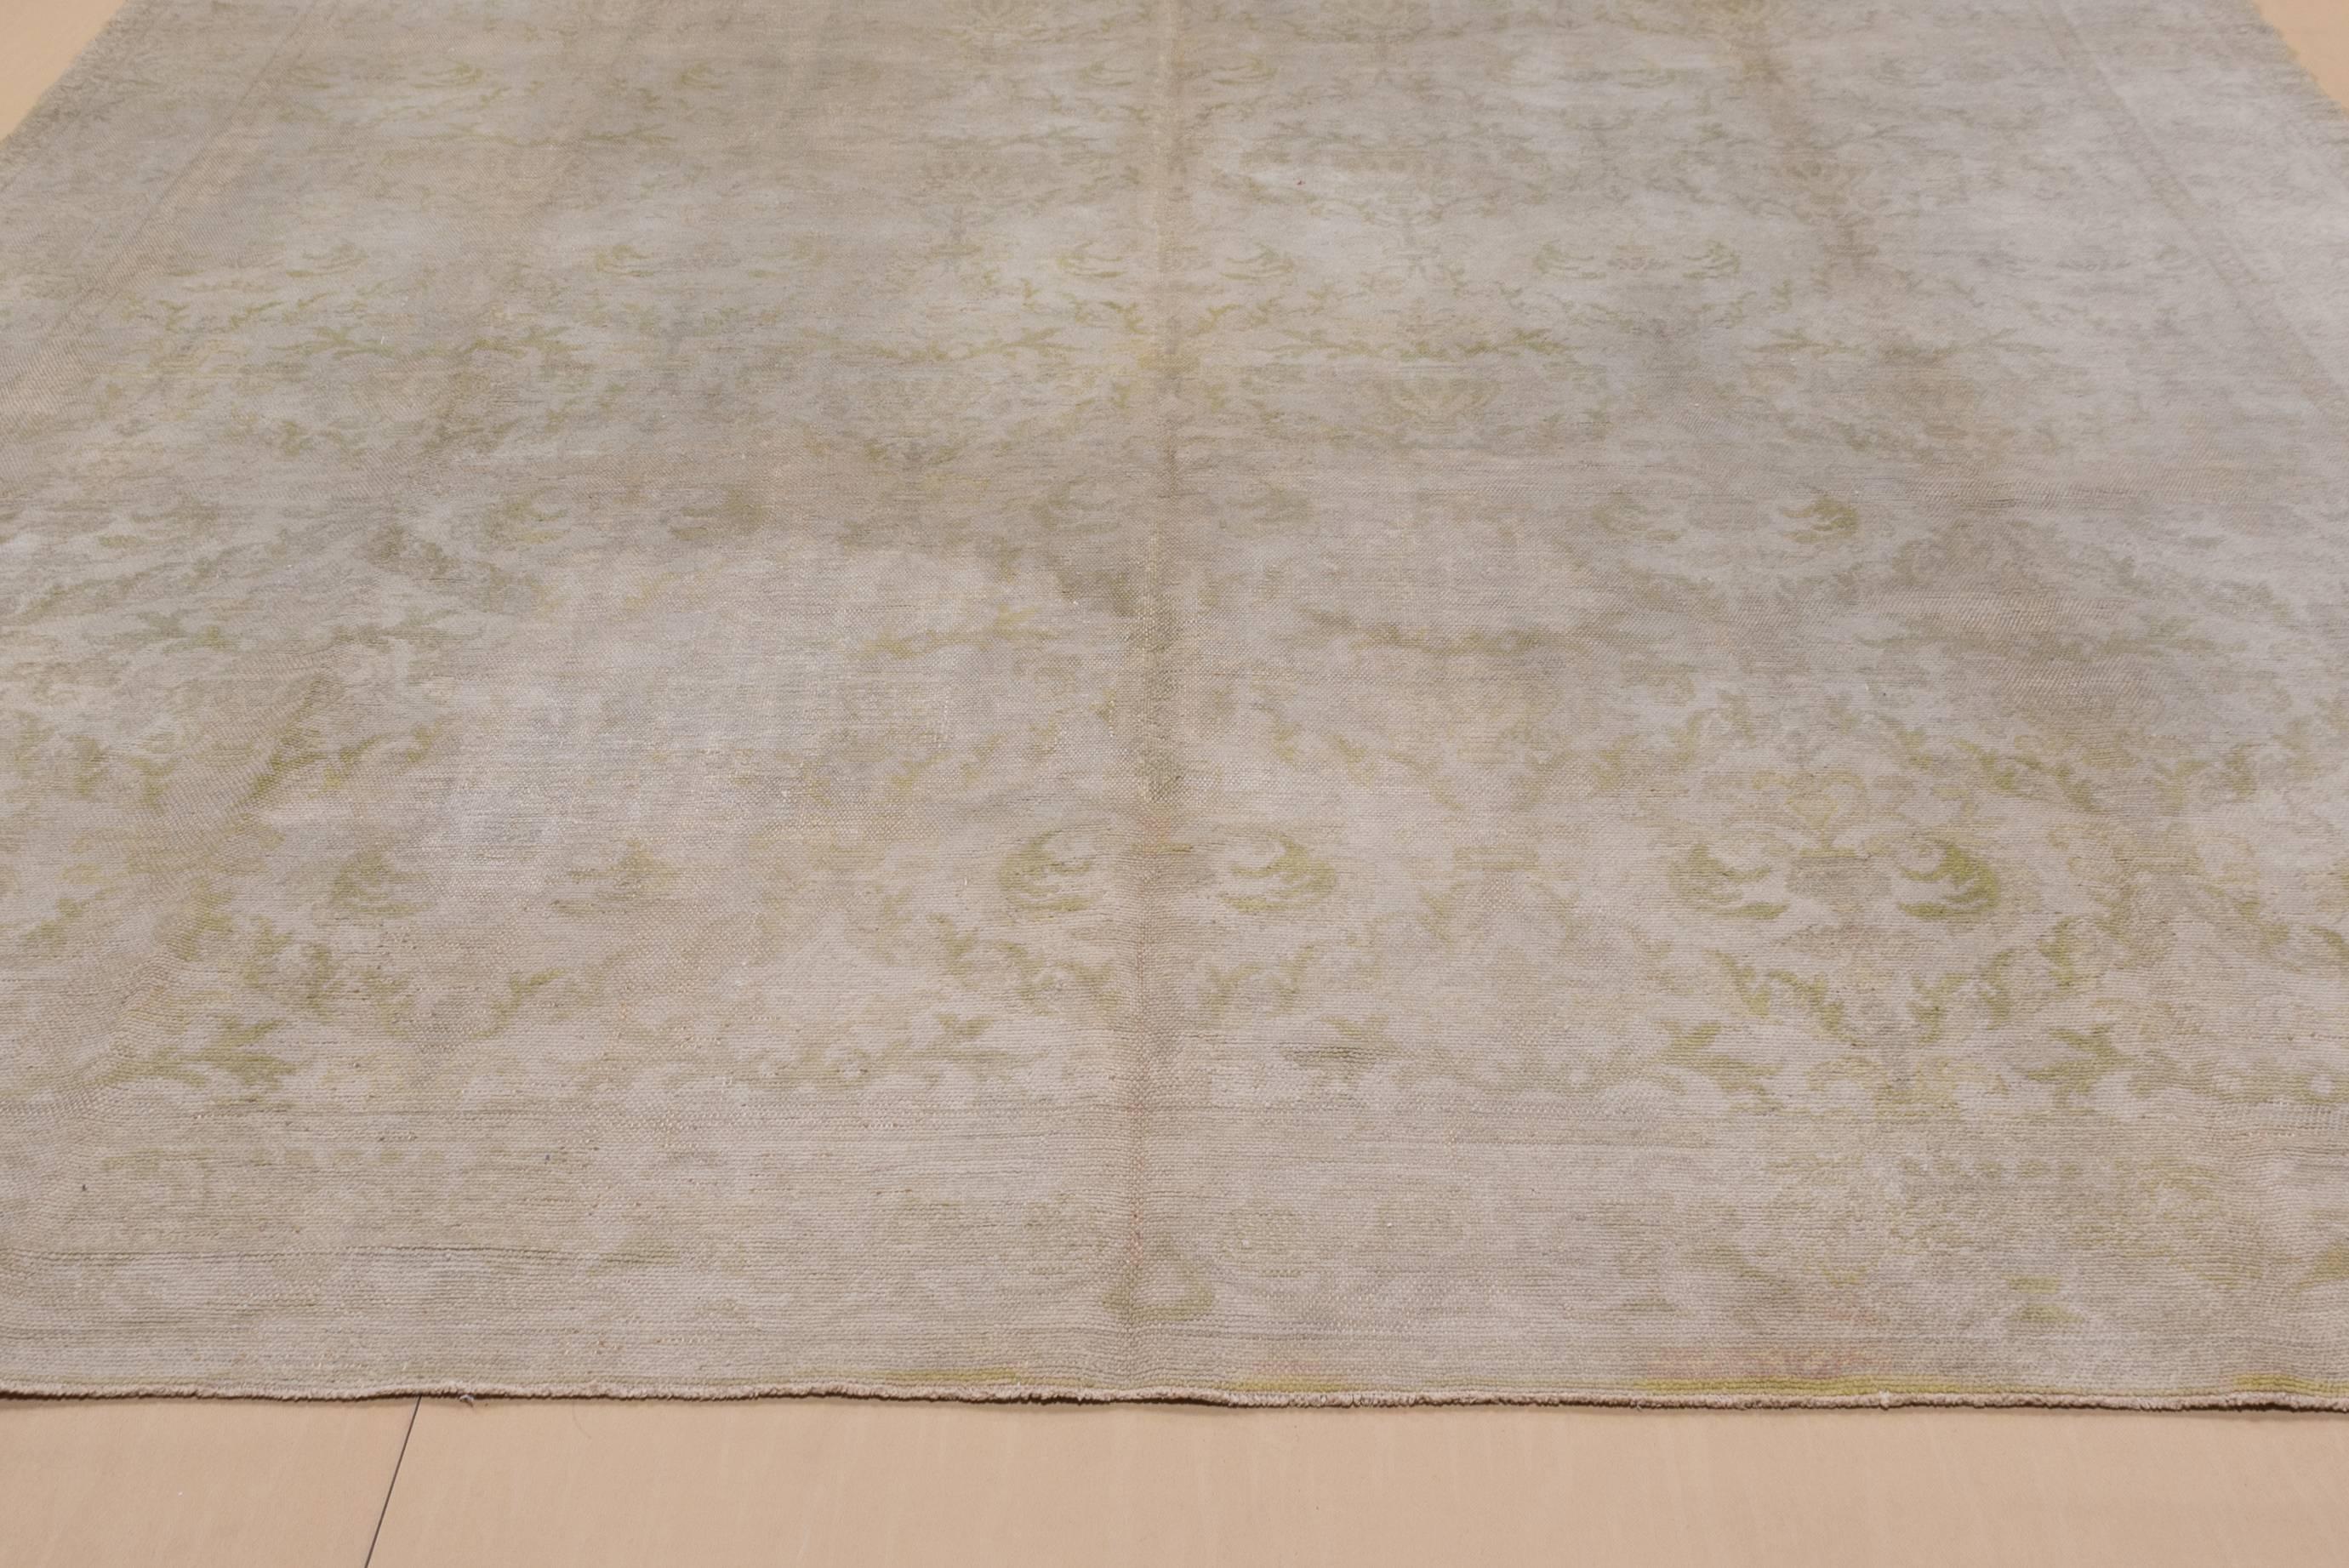 Woven with the single warp knot, this lightly toned Spanish carpet has a vase and wreath pattern accented in soft yellow on the general beige ground.